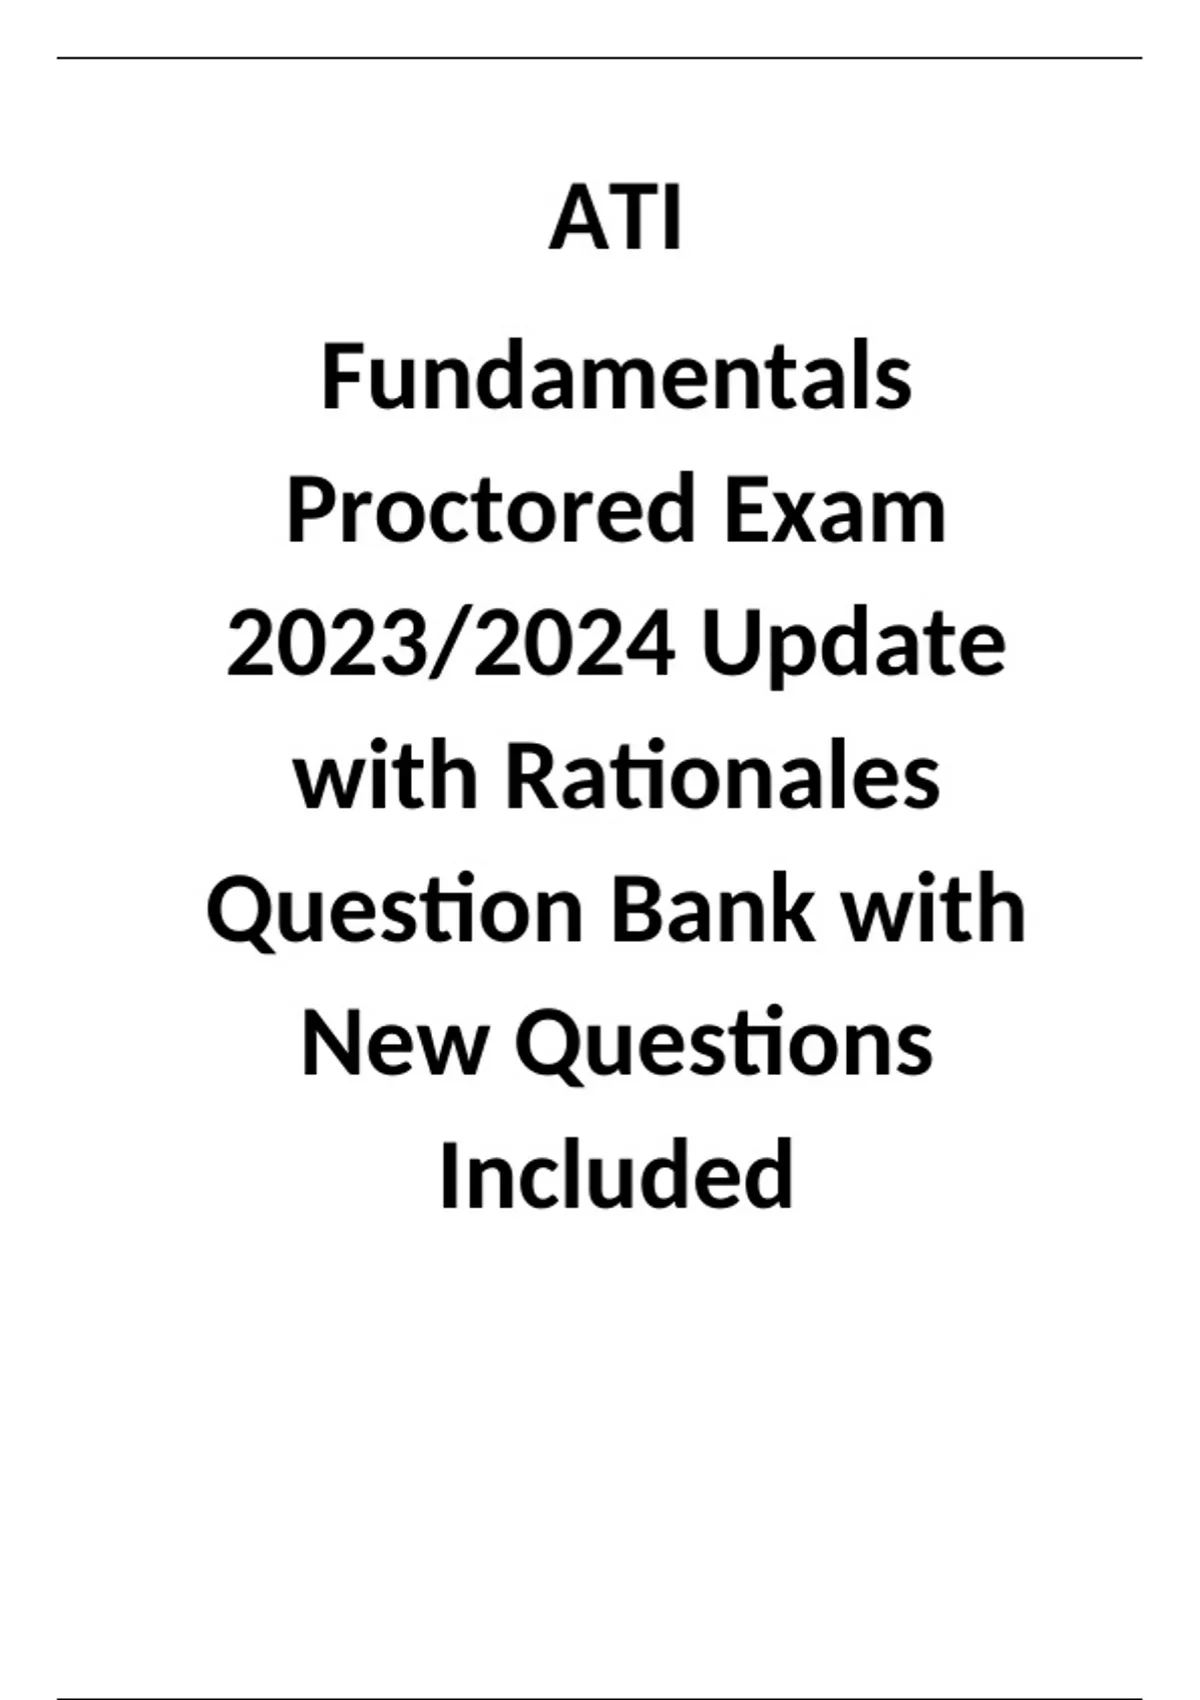 ATI Fundamentals Proctored Exam 2023/2024 Update with Rationales